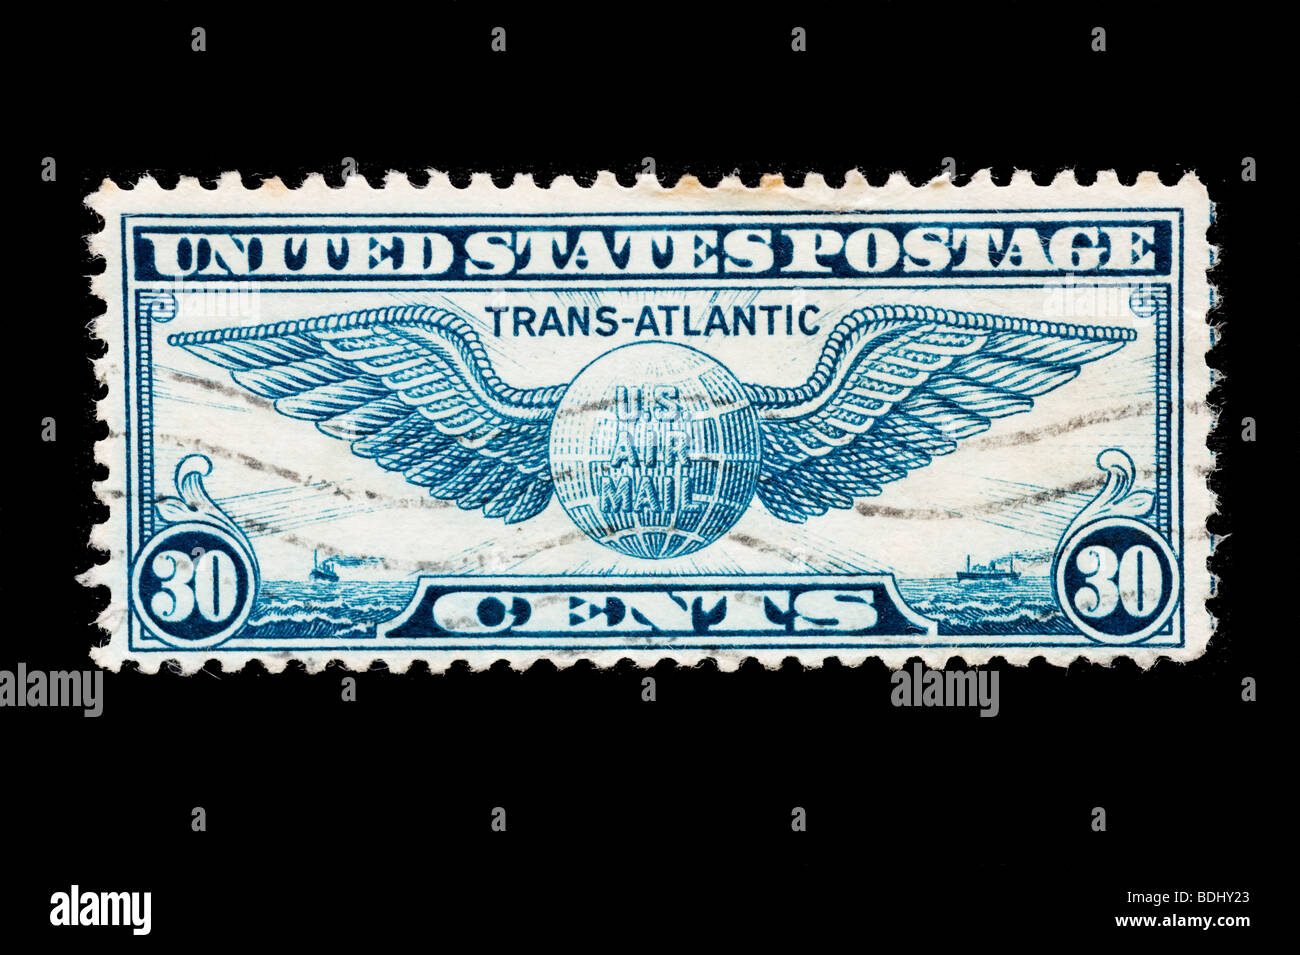 Postage stamp 30 cents Stock Photo